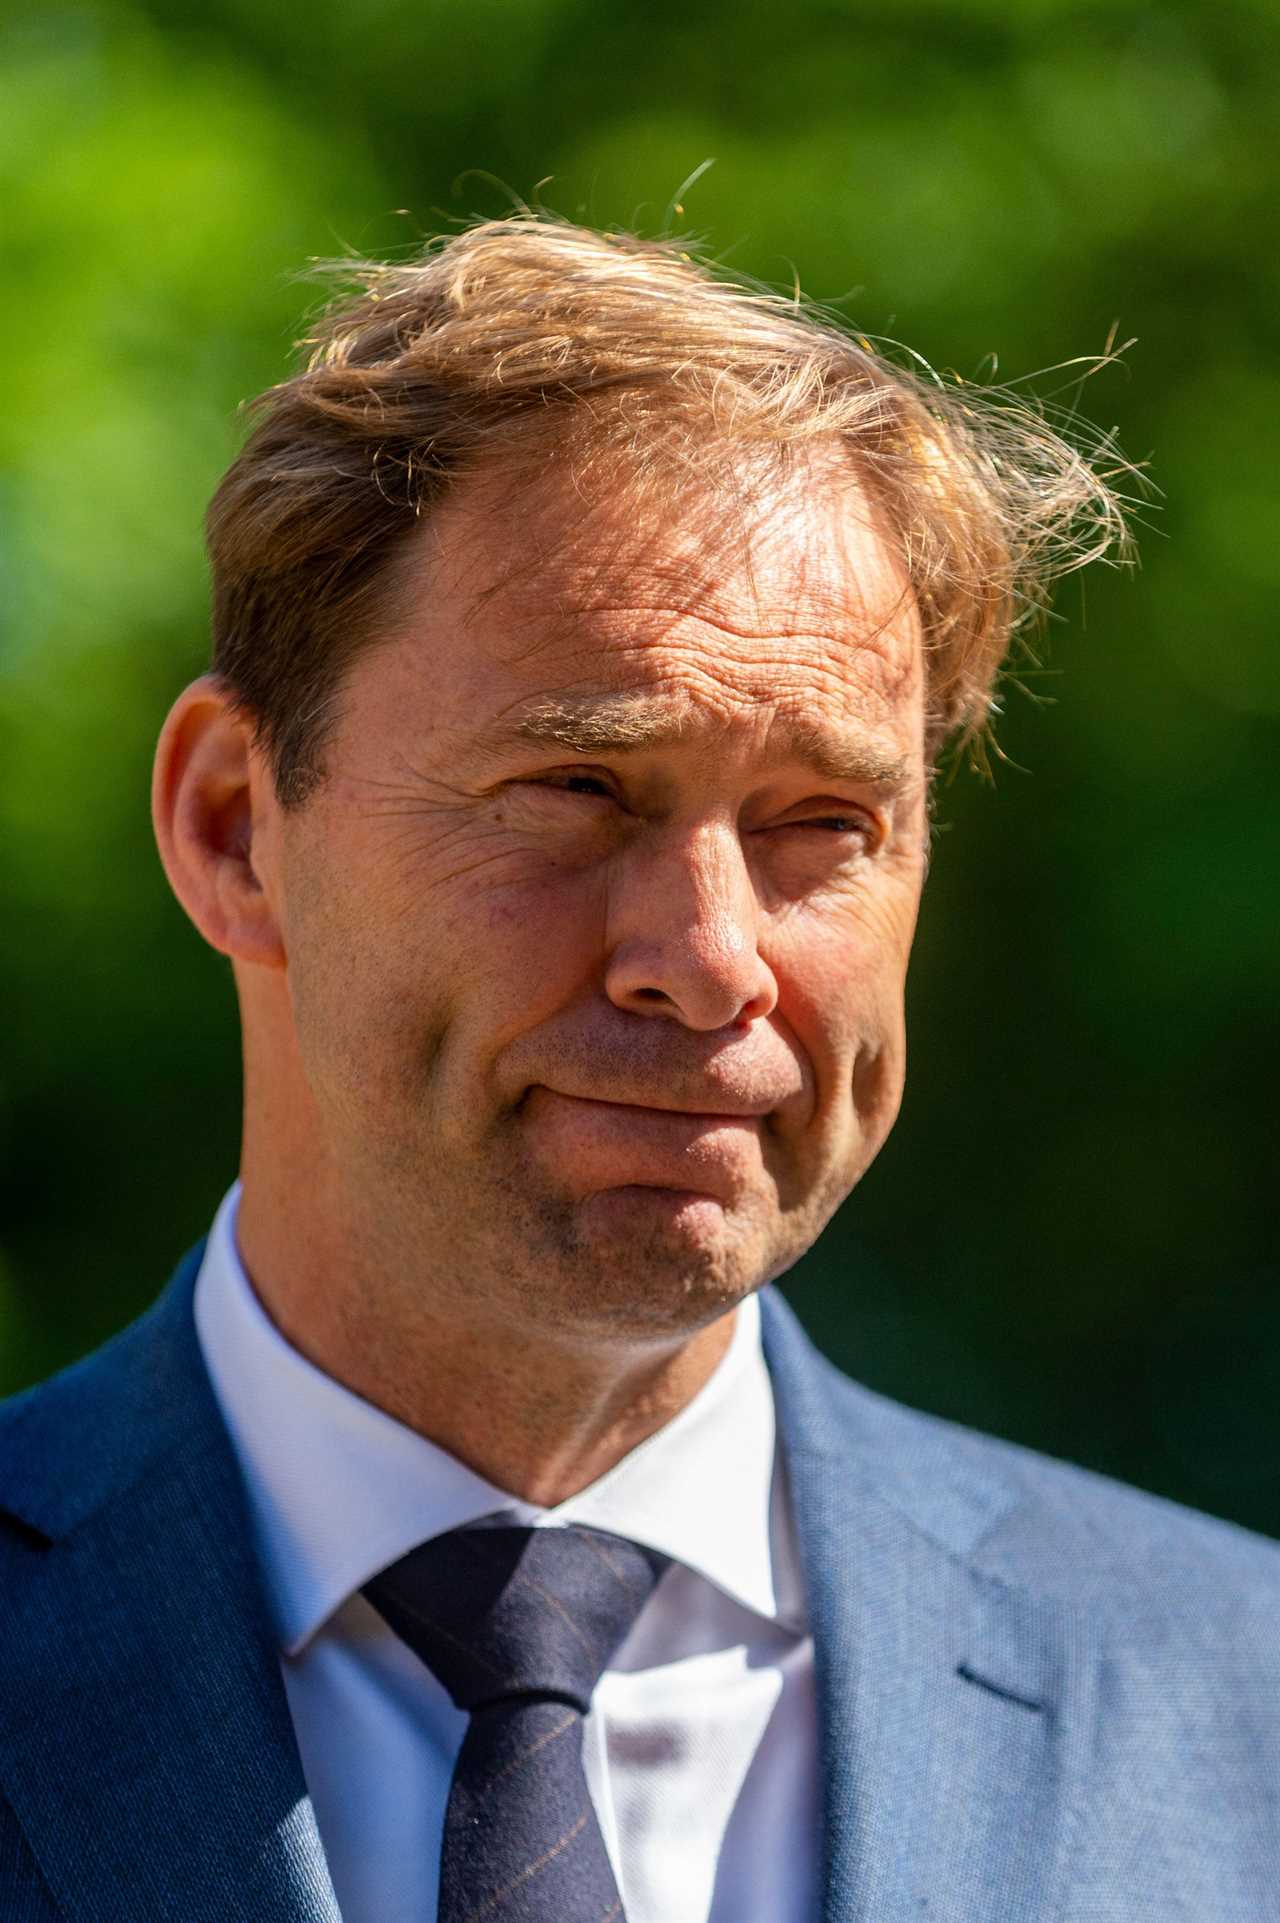 Boris Johnson strips Tobias Ellwood of Tory whip after he failed to back him in no-confidence vote